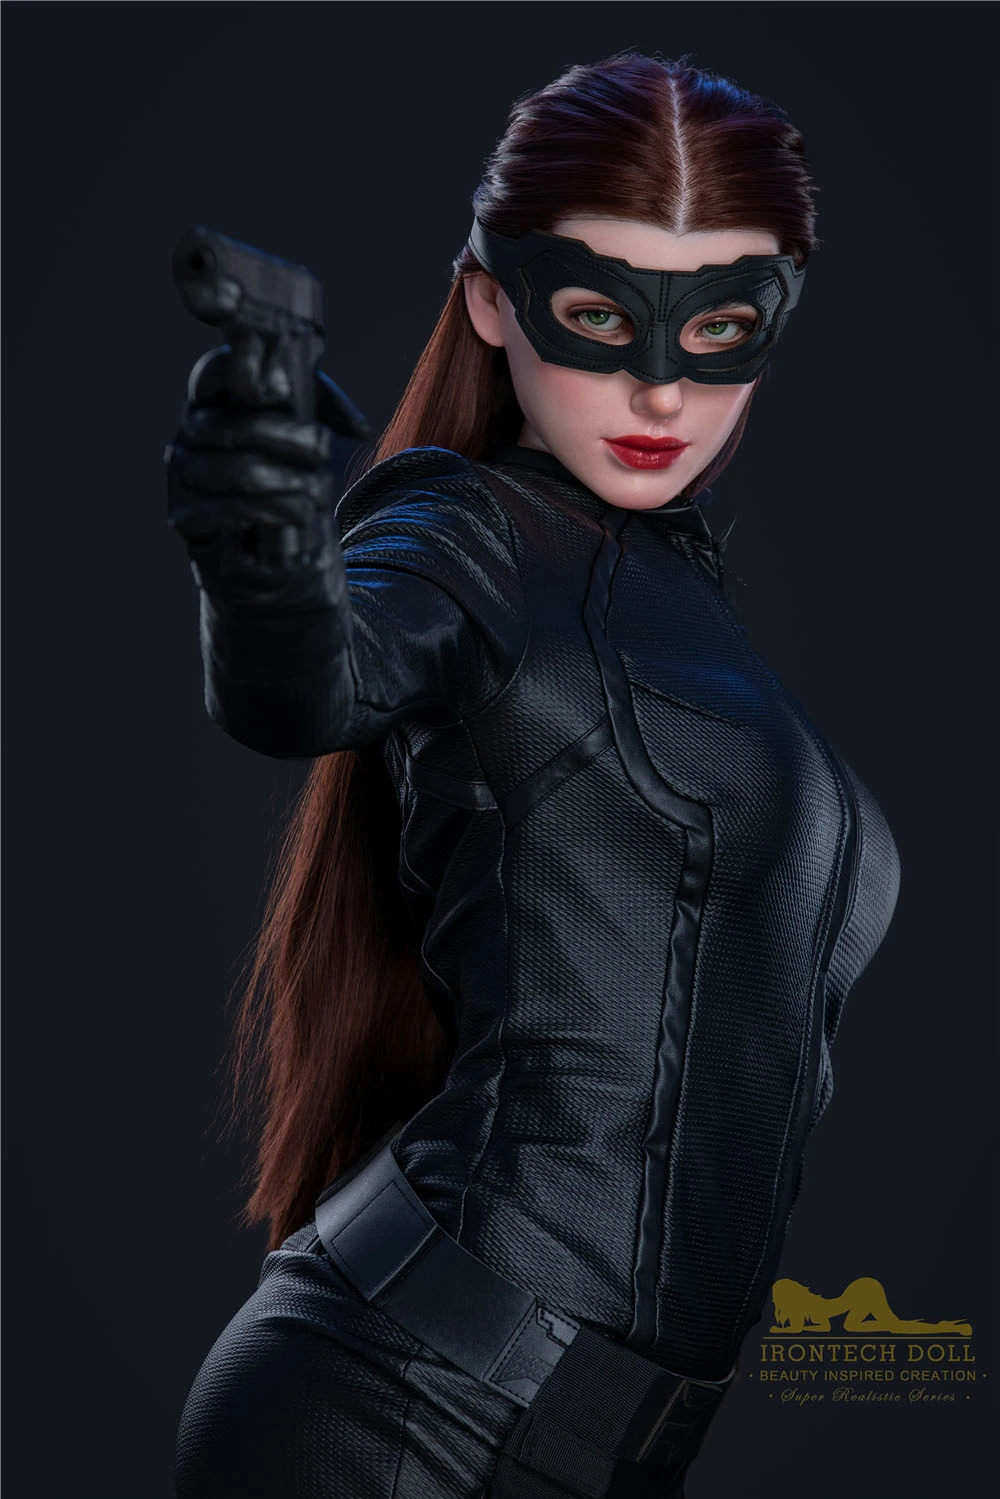  love doll cat woman cosplay